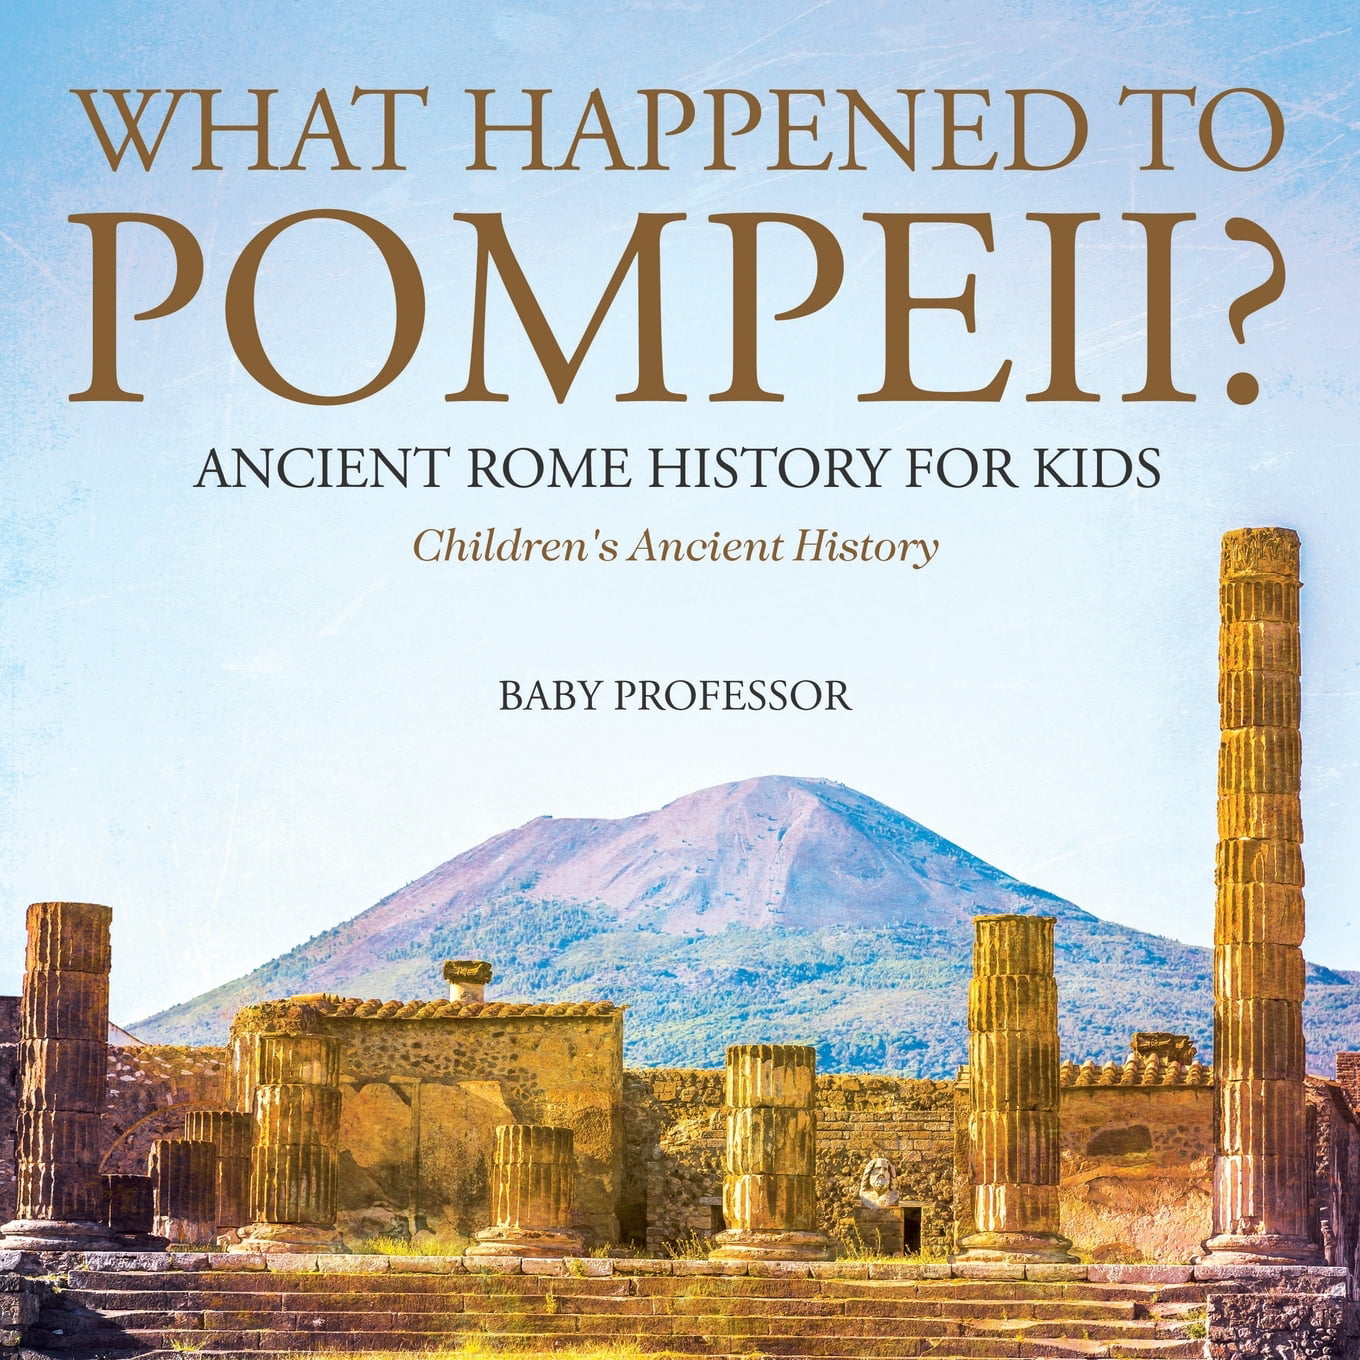 What Happened to Pompeii? Ancient Rome History for Kids Children's ... - F95c4693 B97b 449f 8872 7b93e9905cfD 1.a31611f658D9117f528ba9047549D470